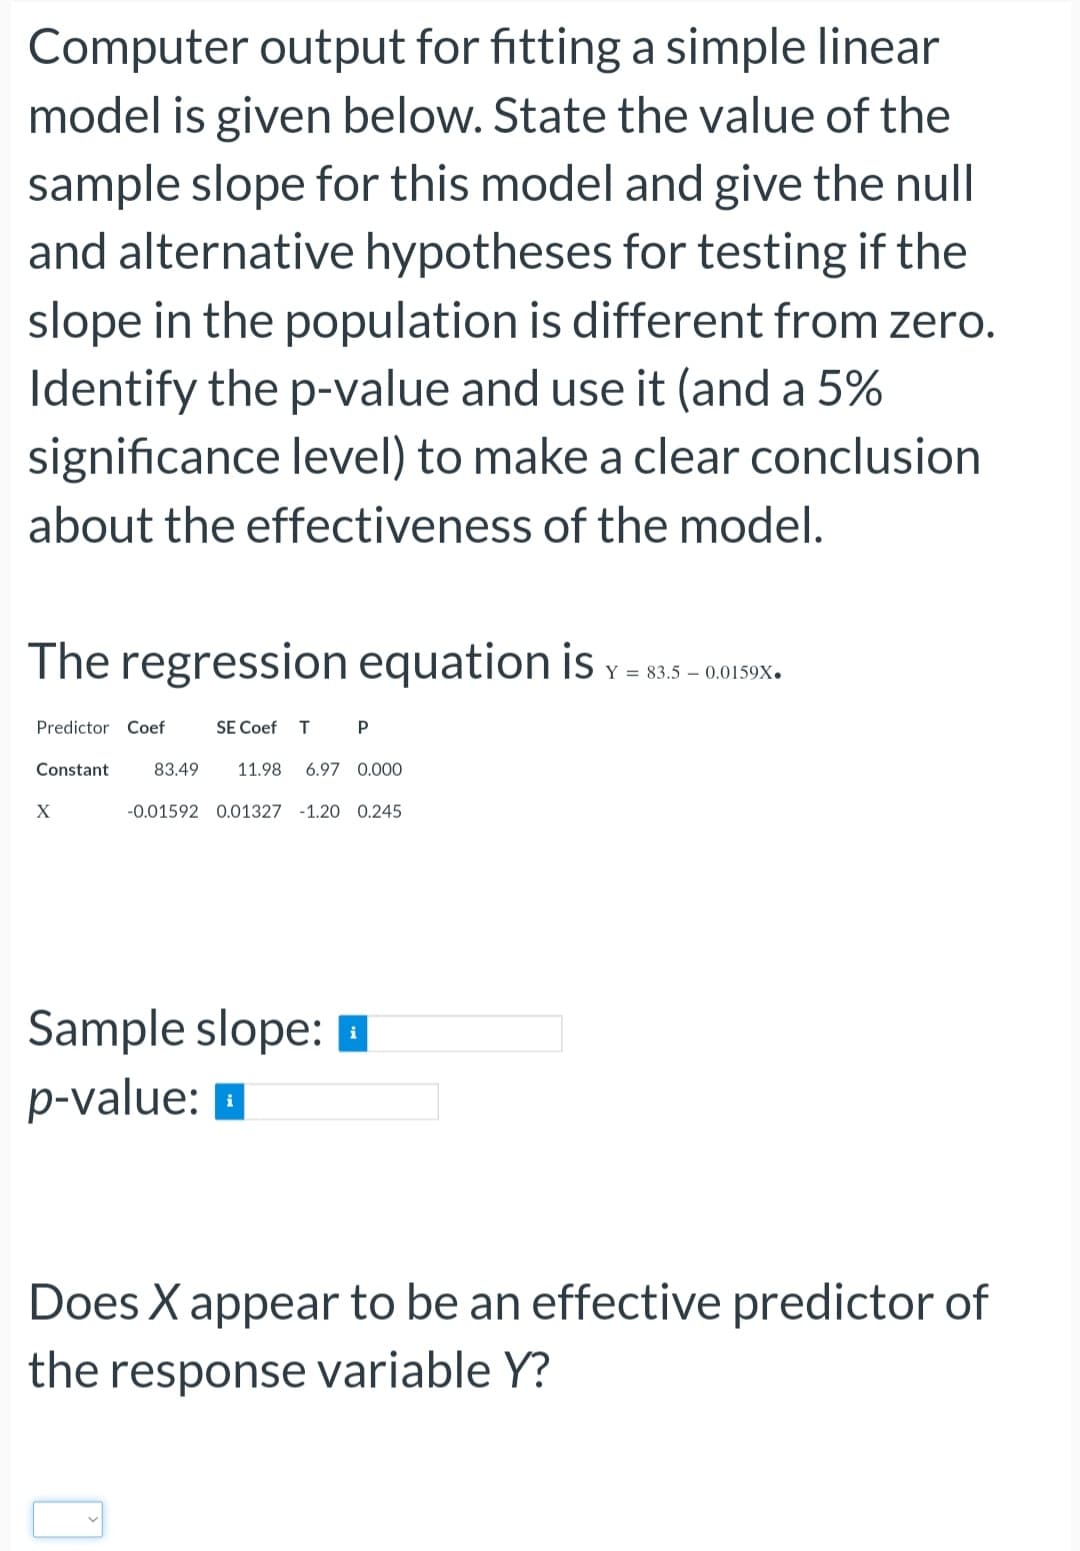 Computer output for fitting a simple linear
model is given below. State the value of the
sample slope for this model and give the null
and alternative hypotheses for testing if the
slope in the population is different from zero.
Identify the p-value and use it (and a 5%
significance level) to make a clear conclusion
about the effectiveness of the model.
The regression equation is Y=83.5 -0.0159X
Predictor Coef
Constant
X
SE Coef T P
83.49 11.98 6.97 0.000
-0.01592 0.01327 -1.20 0.245
Sample slope:
p-value:
Does X appear to be an effective predictor of
the response variable Y?